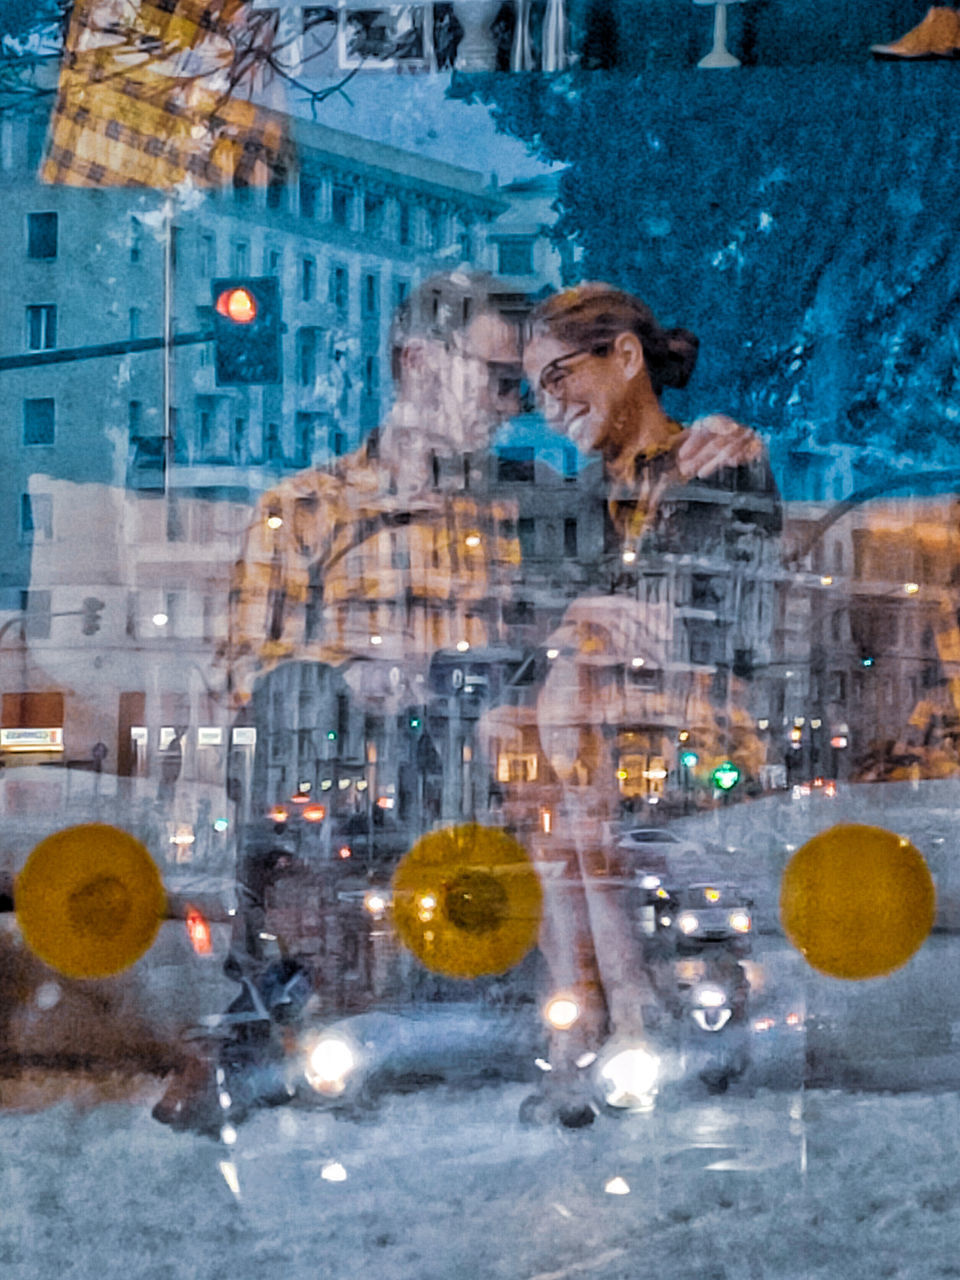 DIGITAL COMPOSITE IMAGE OF WOMAN WITH REFLECTION ON GLASS WINDOW IN CITY